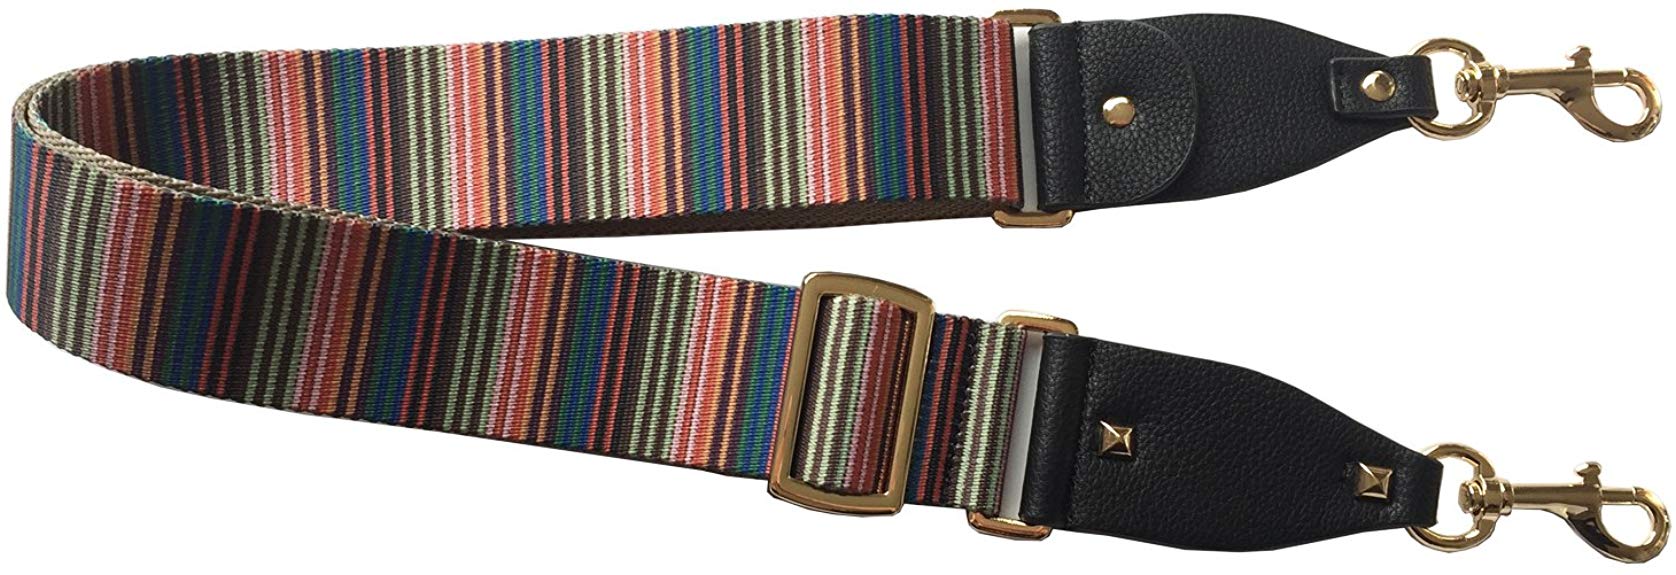 Lam Gallery 2" Wide Purse Strap Replacement Guitar Style Multicolor Canvas 35"- 52" Crossbody Strap for Handbags